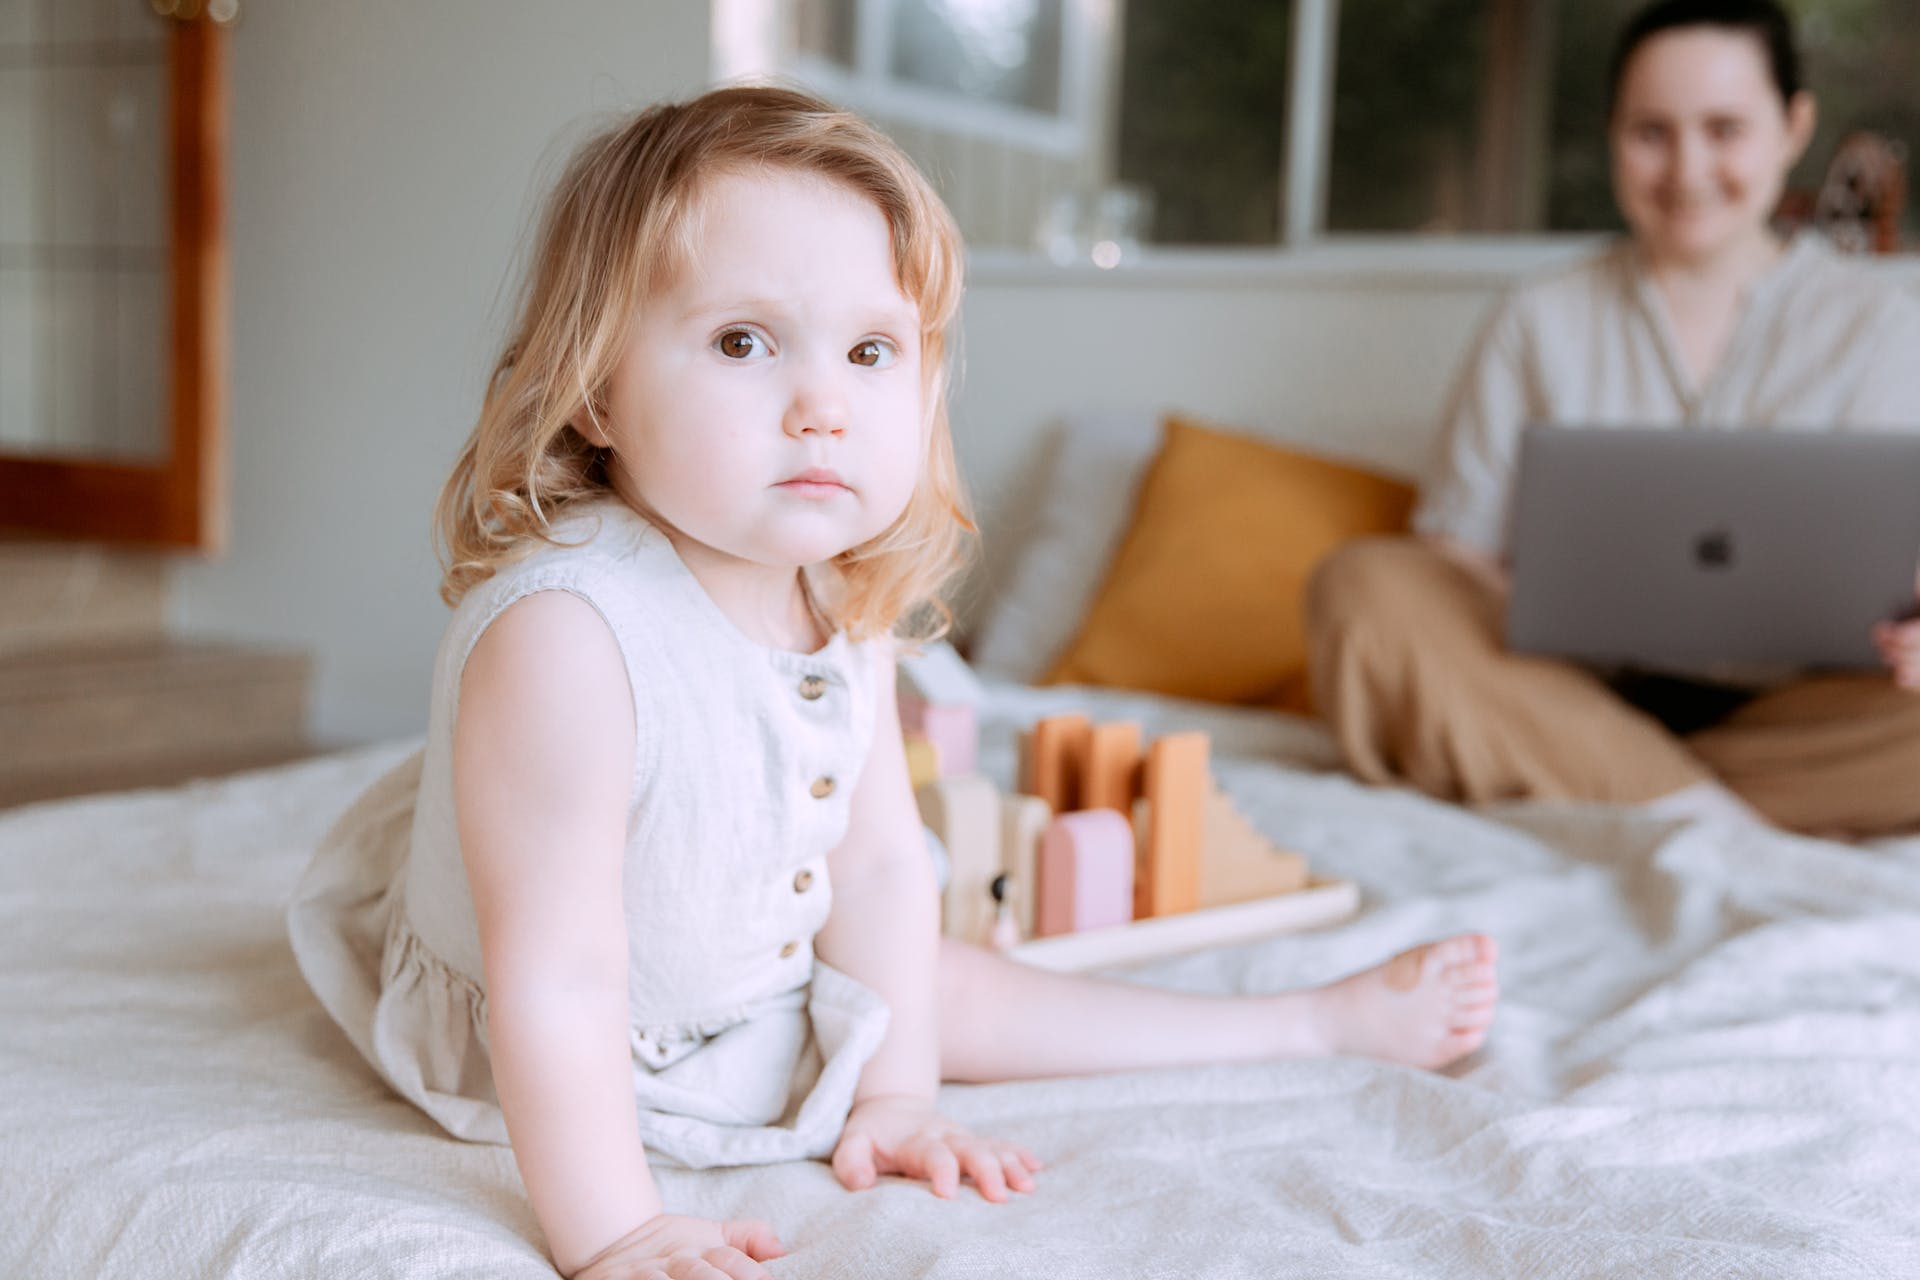 A little girl sitting on a bed with a woman | Source: Pexels